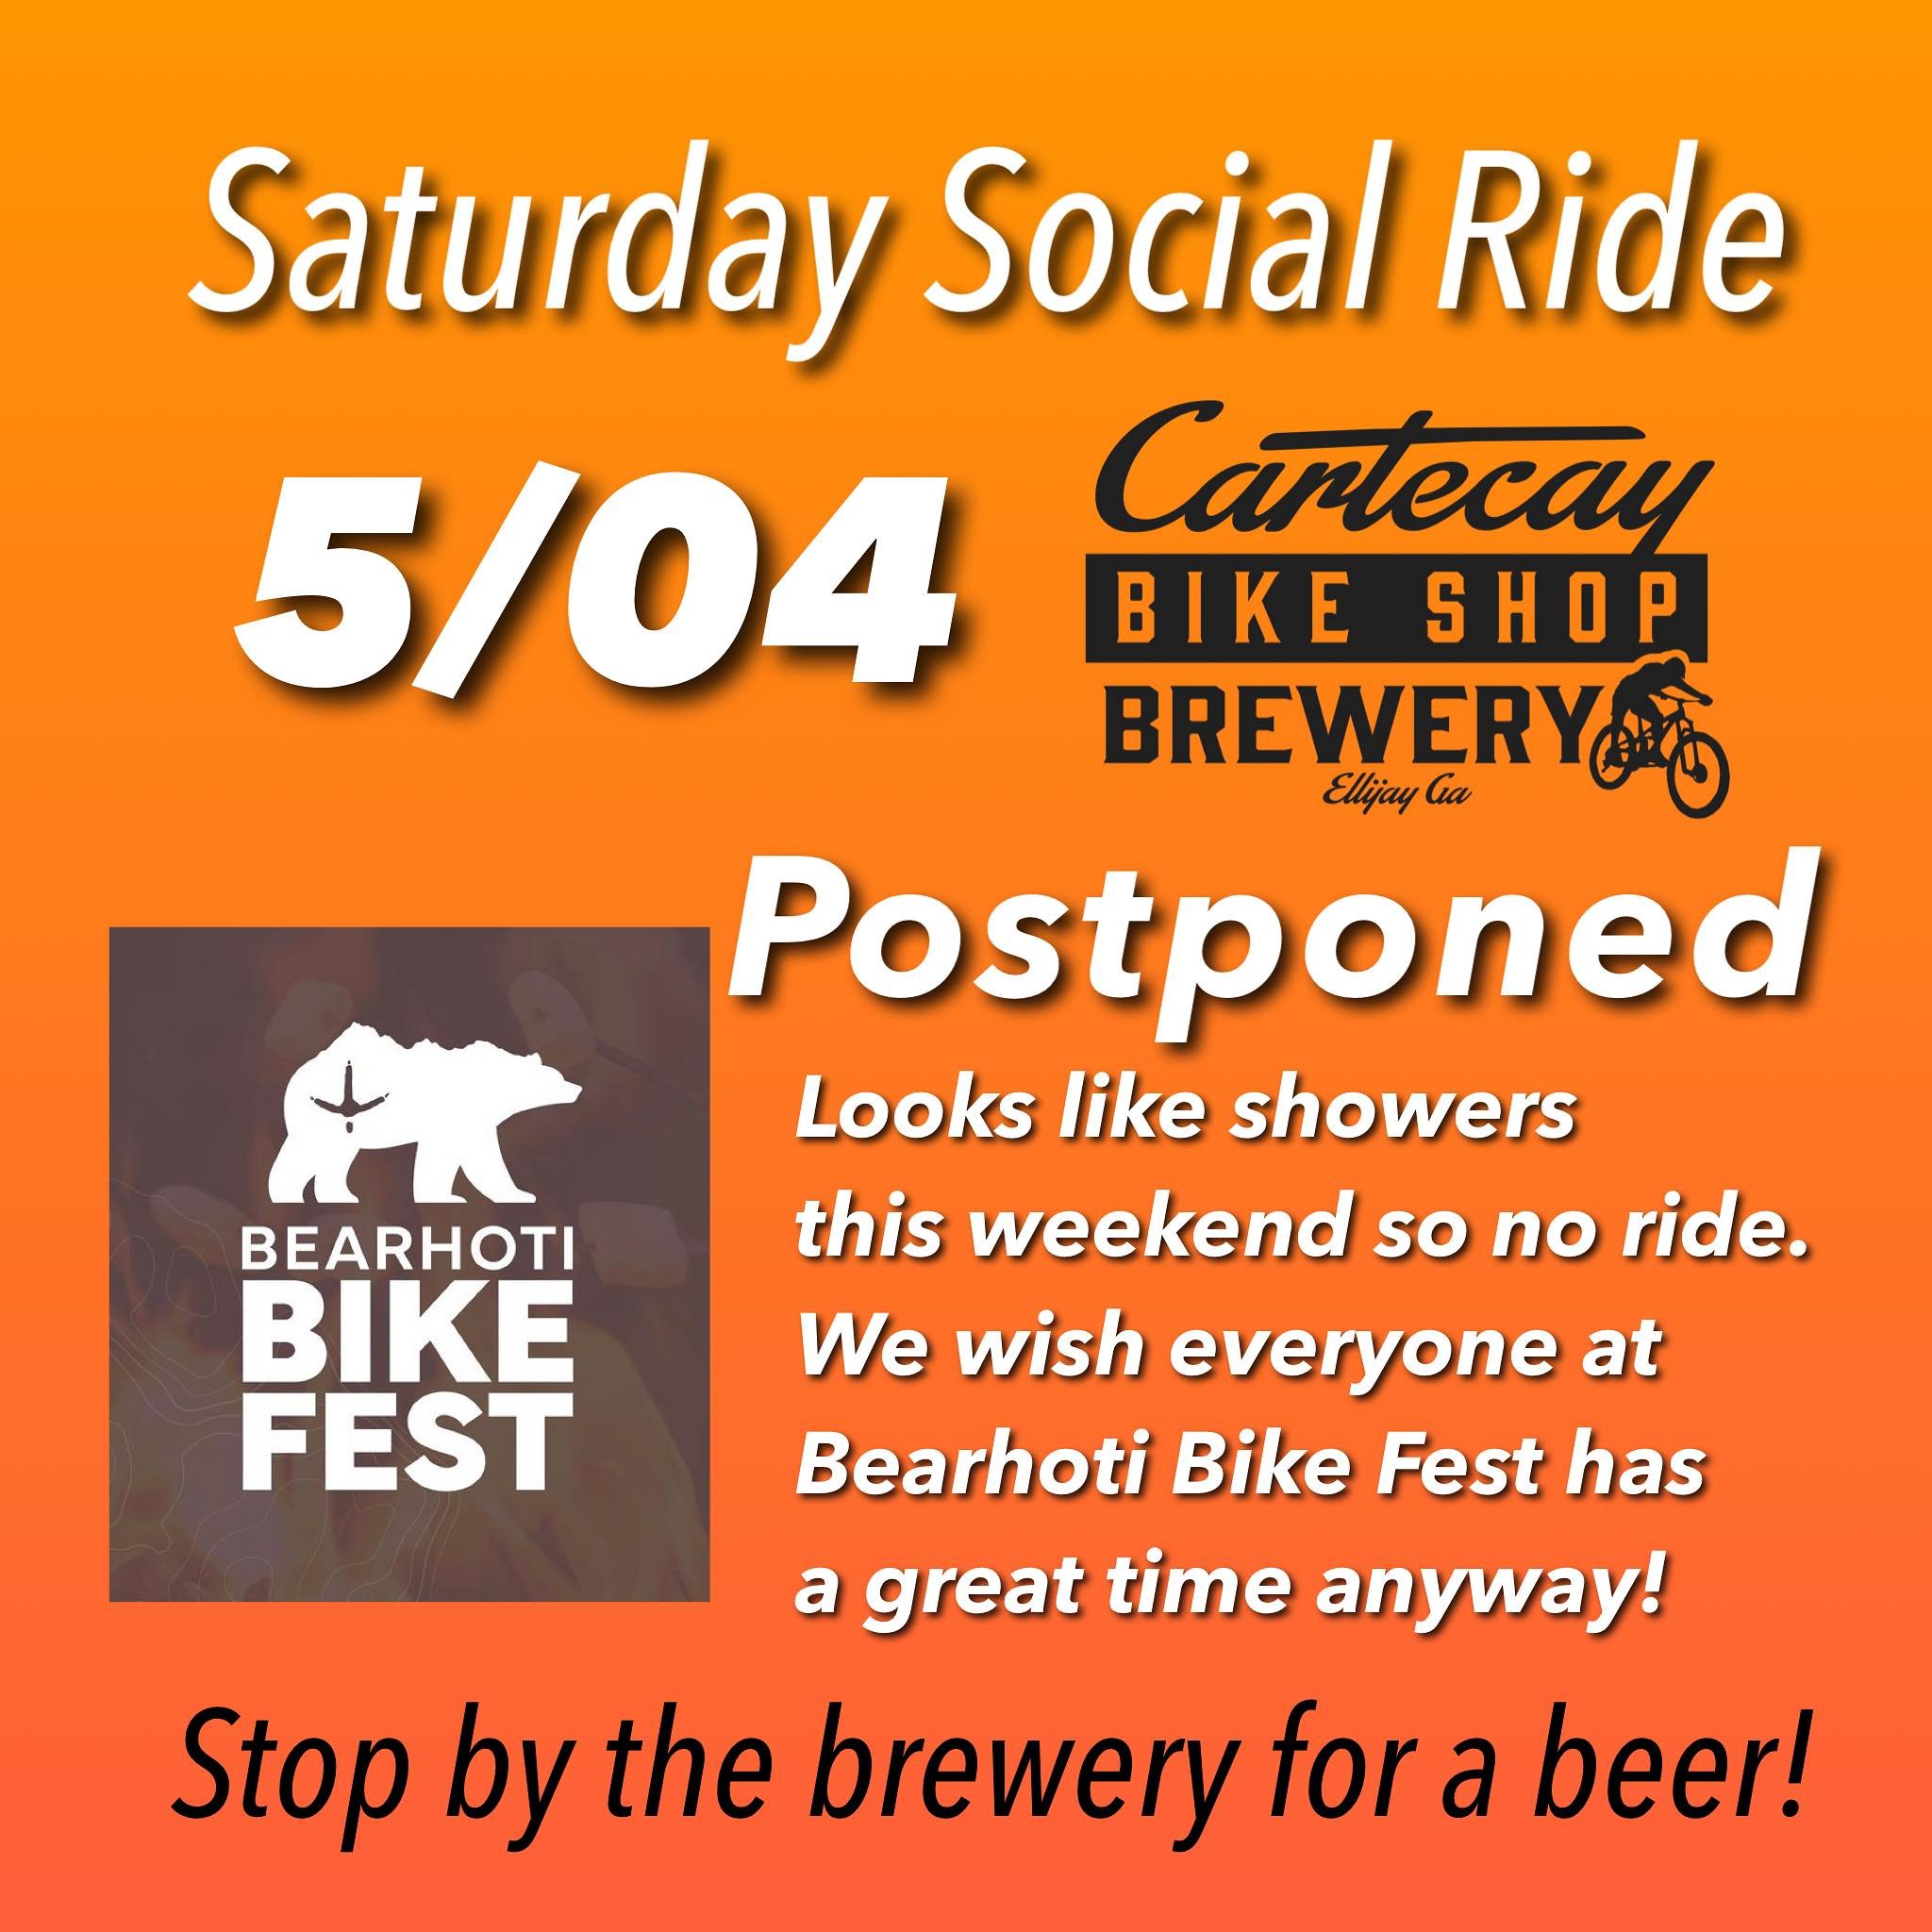 We are skipping the social ride due to spotty weather. If you are Bearhoti Bike Fest we say go for it and have a great time!